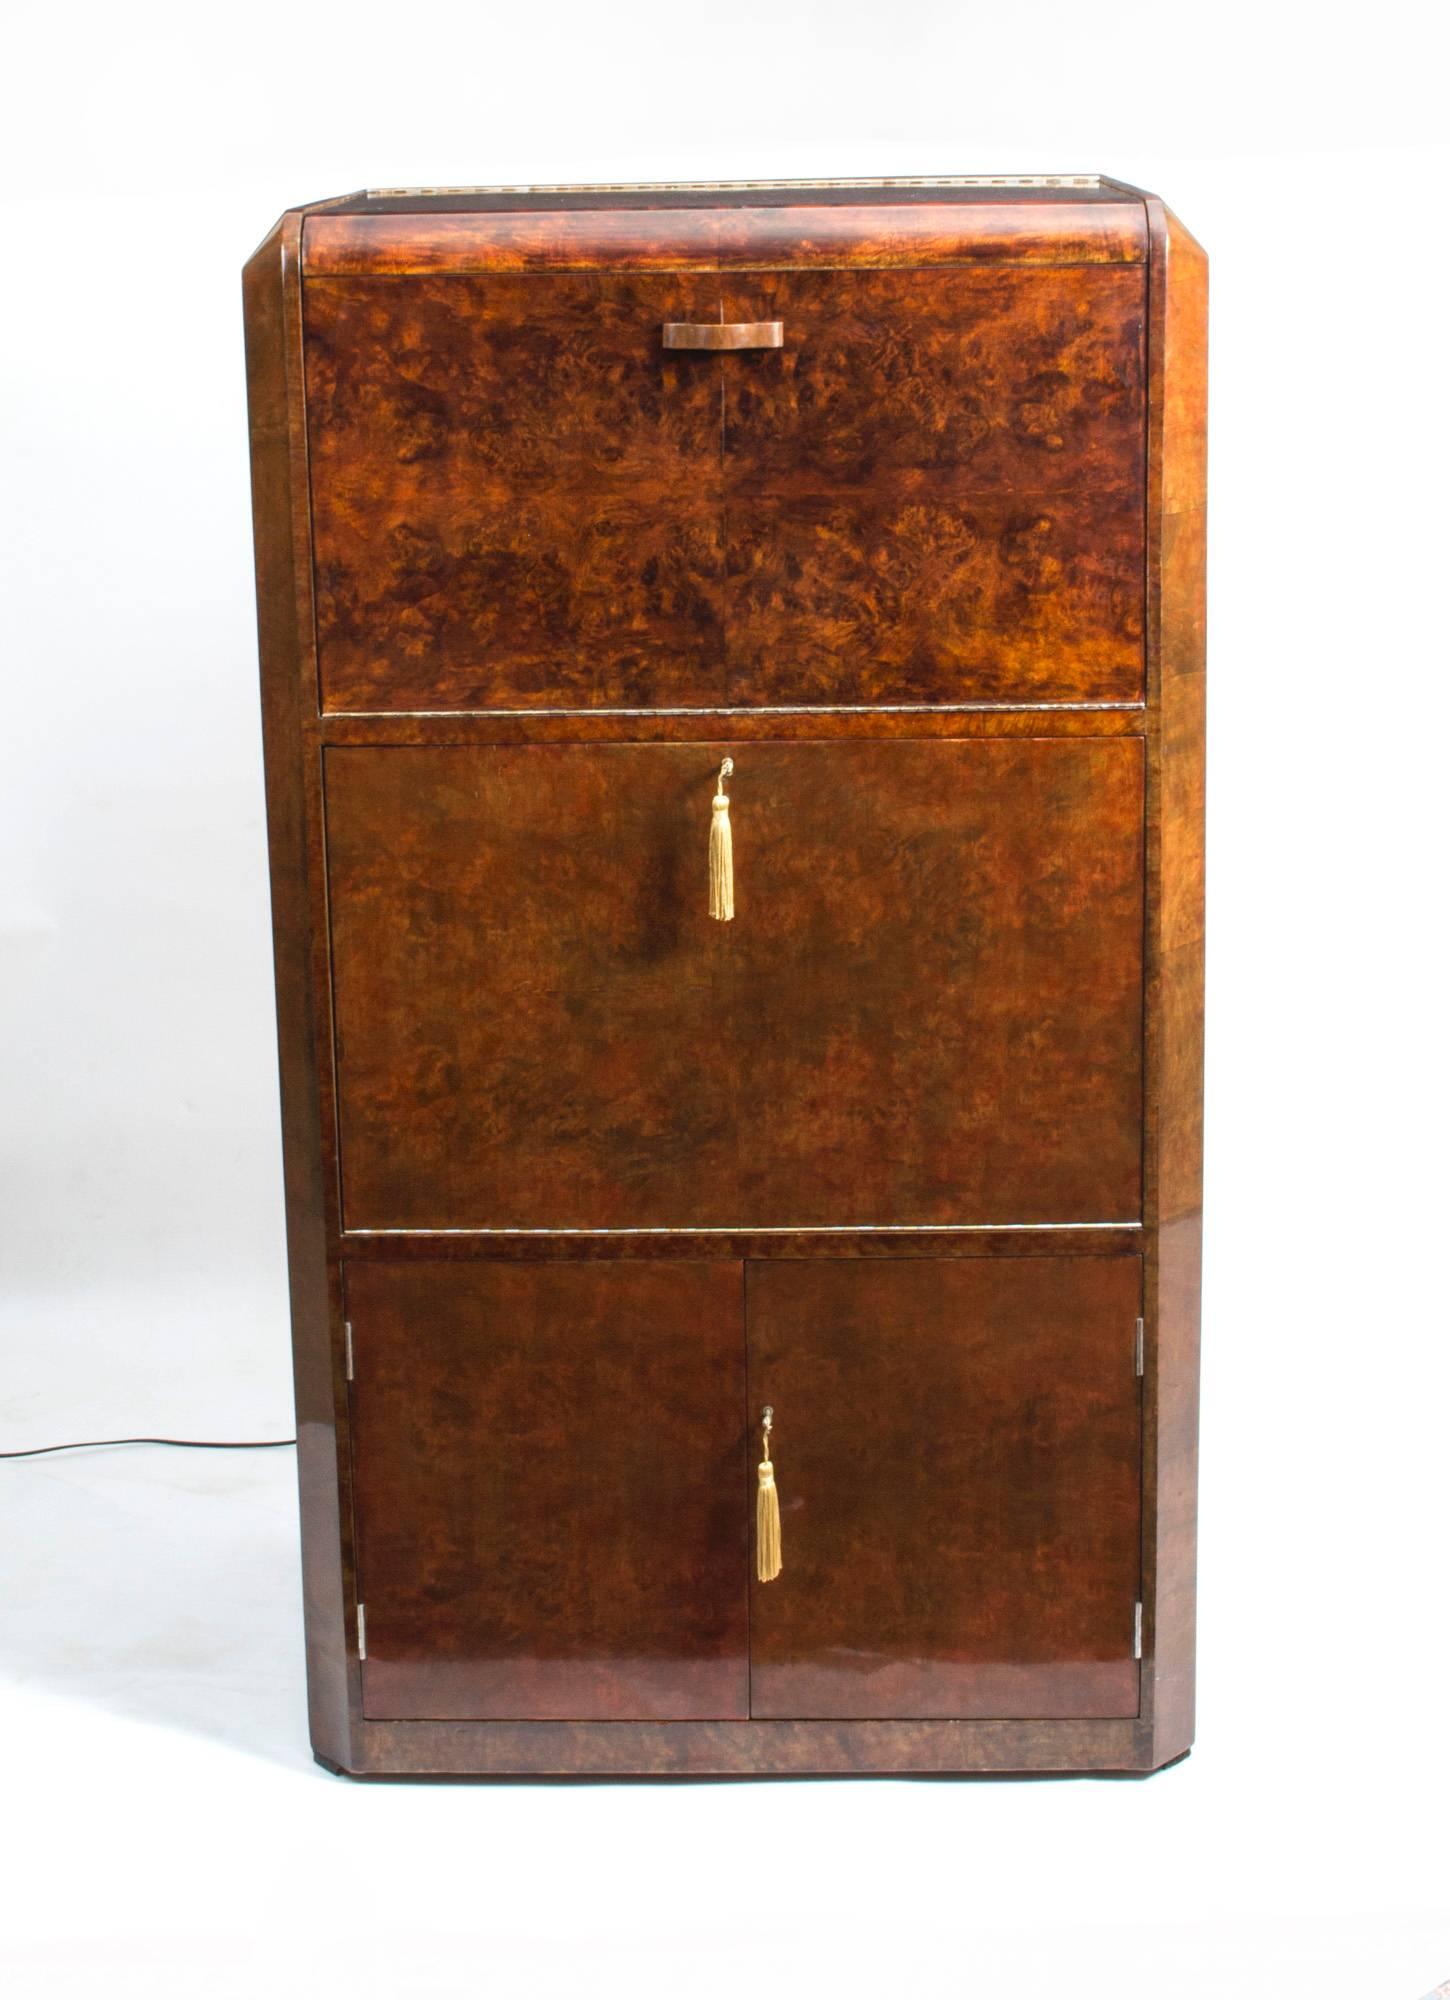 This is a fantastic antique Art Deco burr walnut cocktail cabinet, circa 1930 in date.

The hinged top opens to reveal a bleached interior with mirrored back and clear perspex glass and bottle holder.

This is a fall front central section to hold